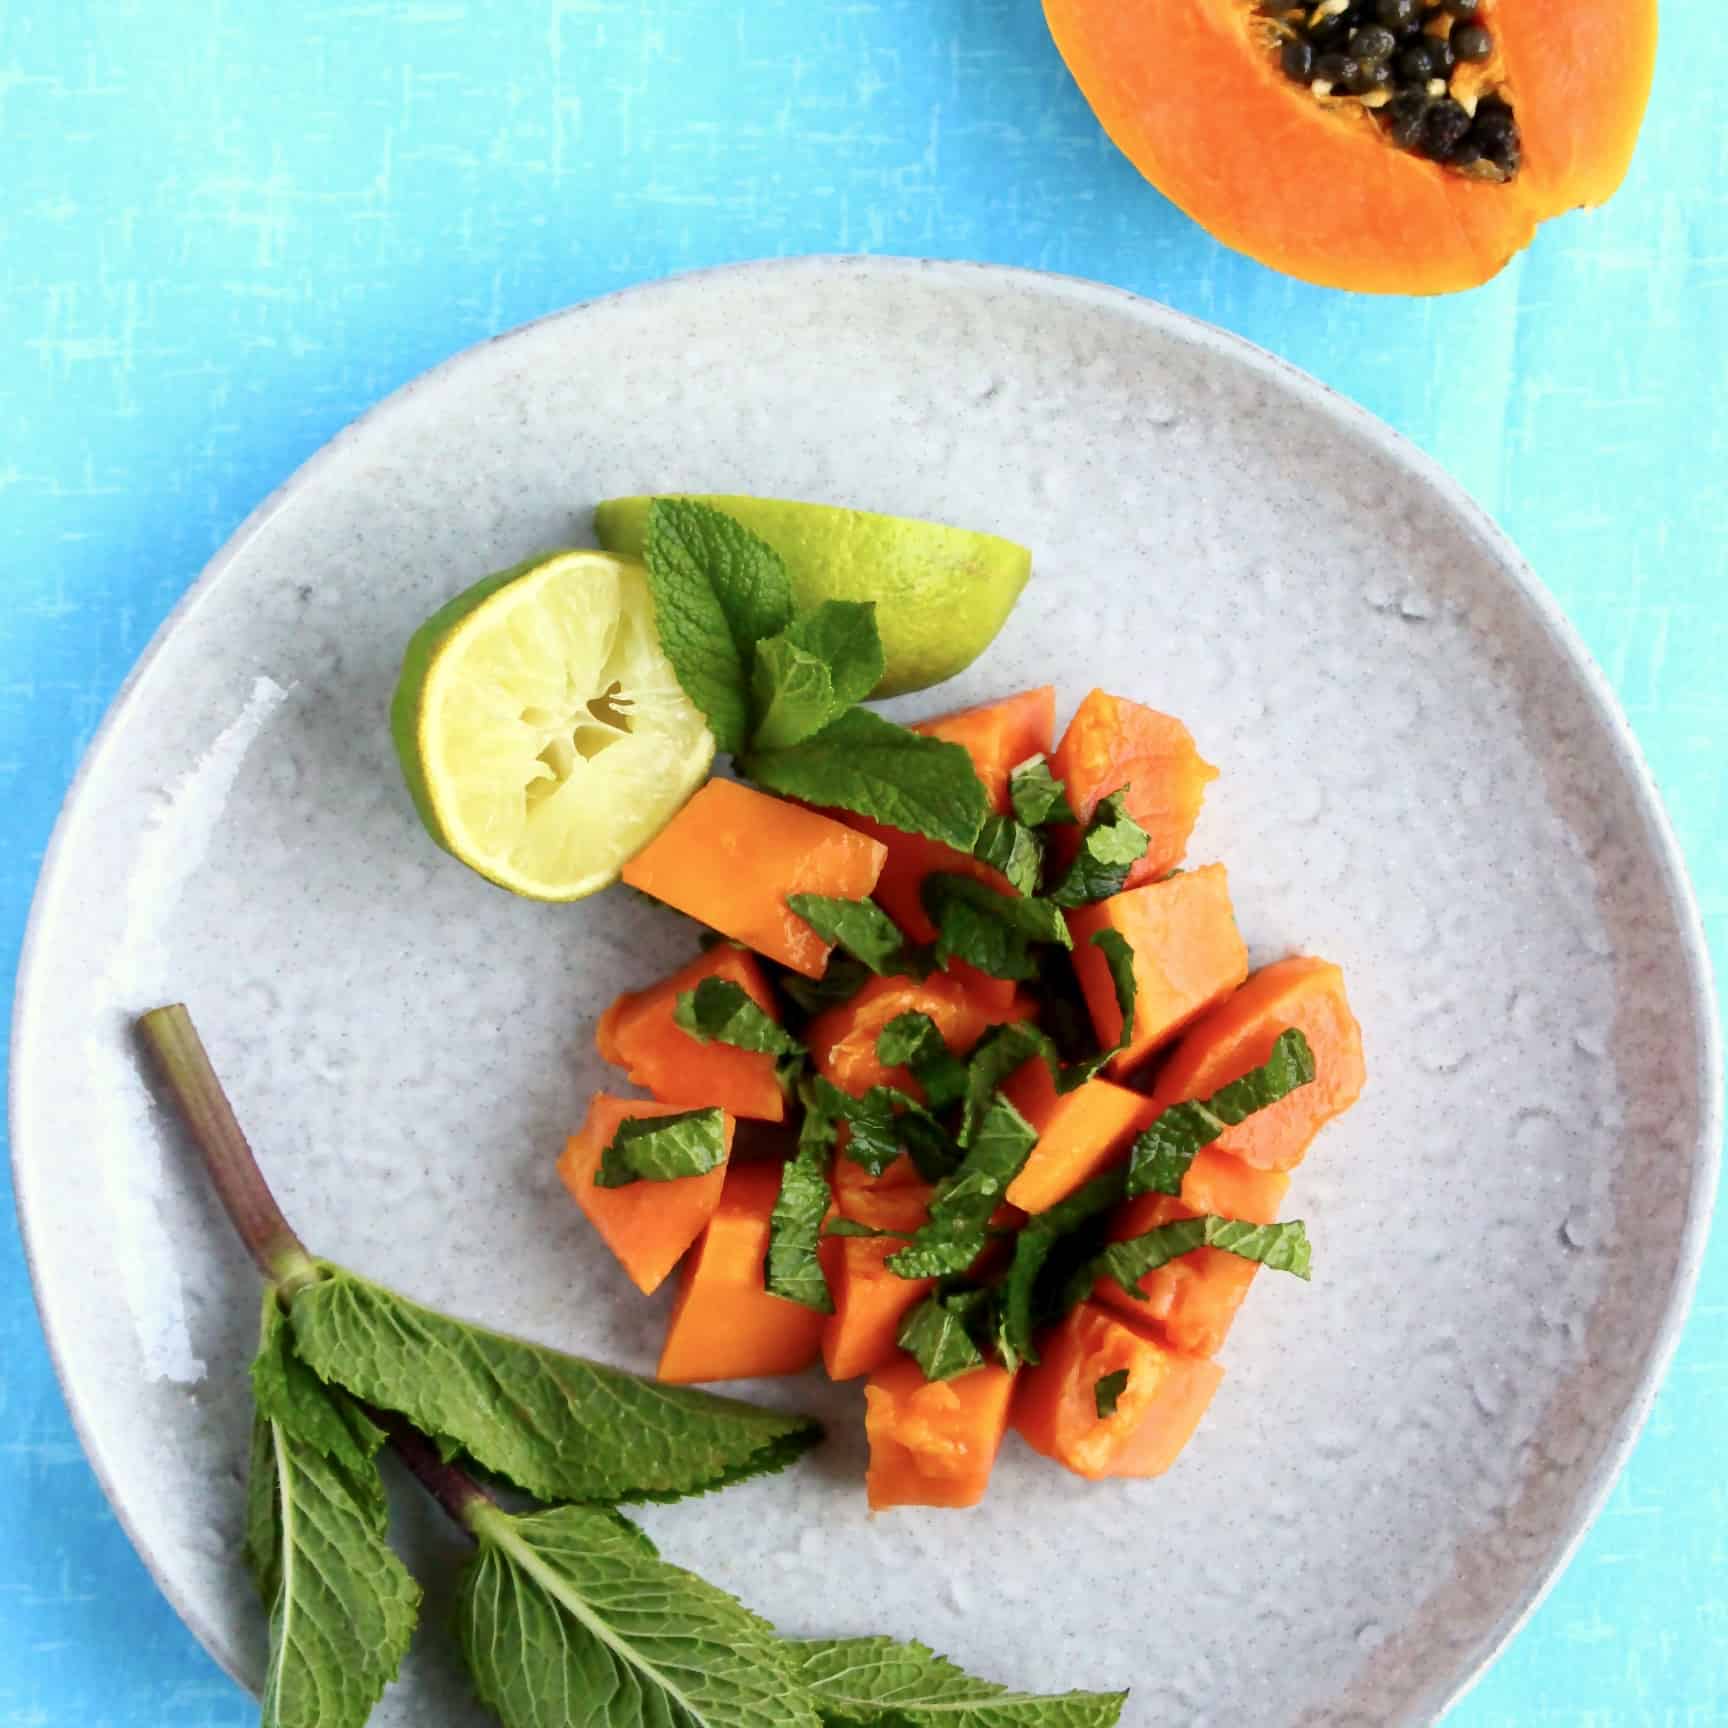 Papaya, lime and mint salad on a grey plate against a blue background